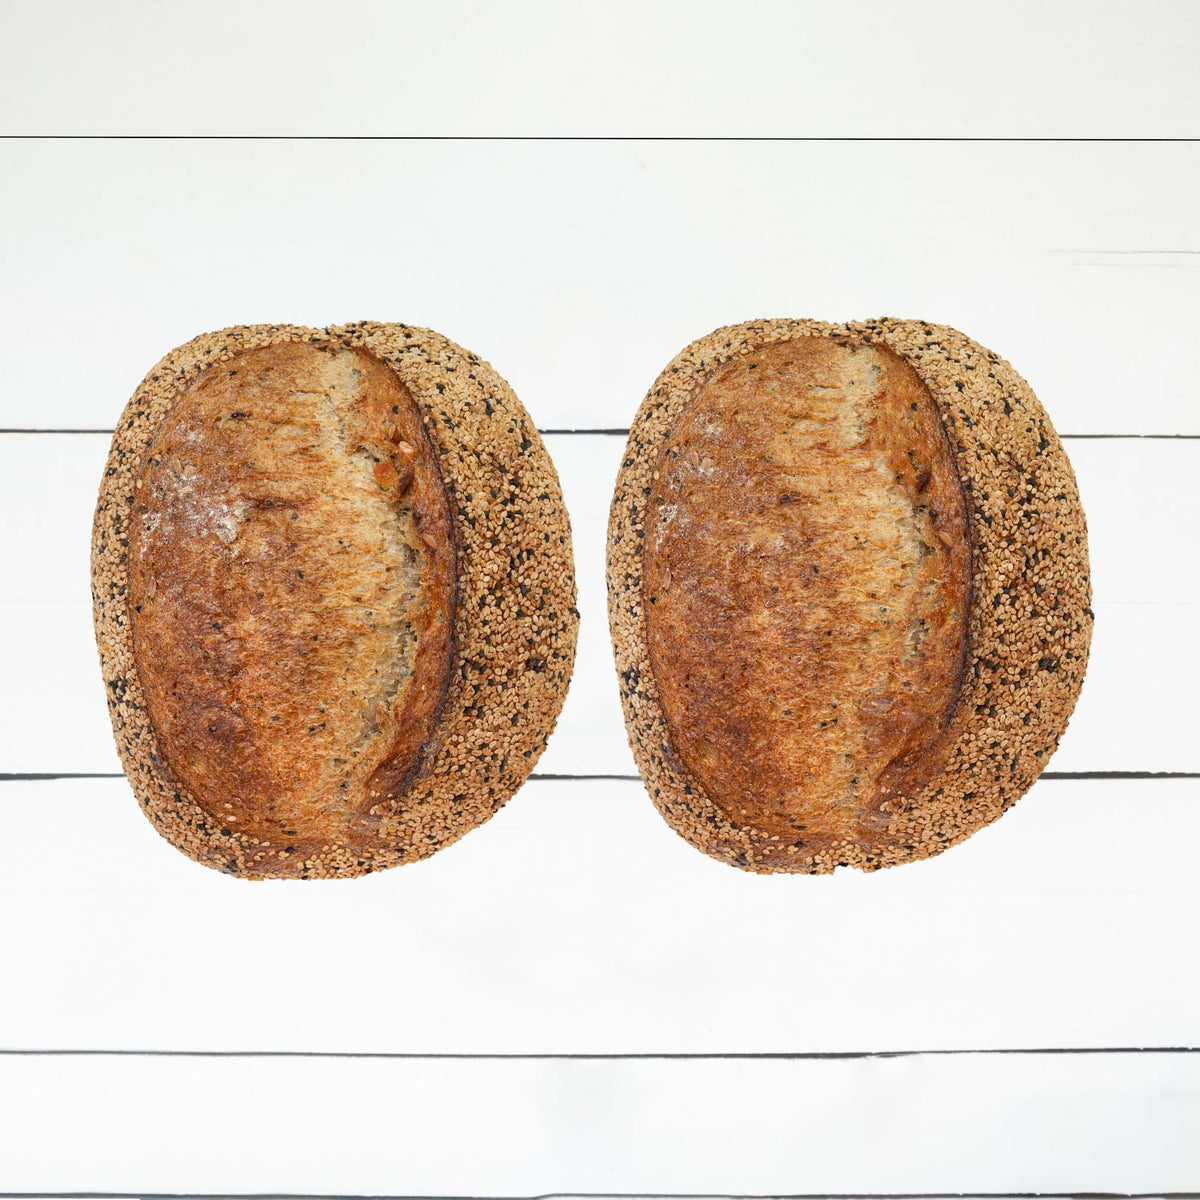 Hella Wet Levain with Seeds (2 Pack)